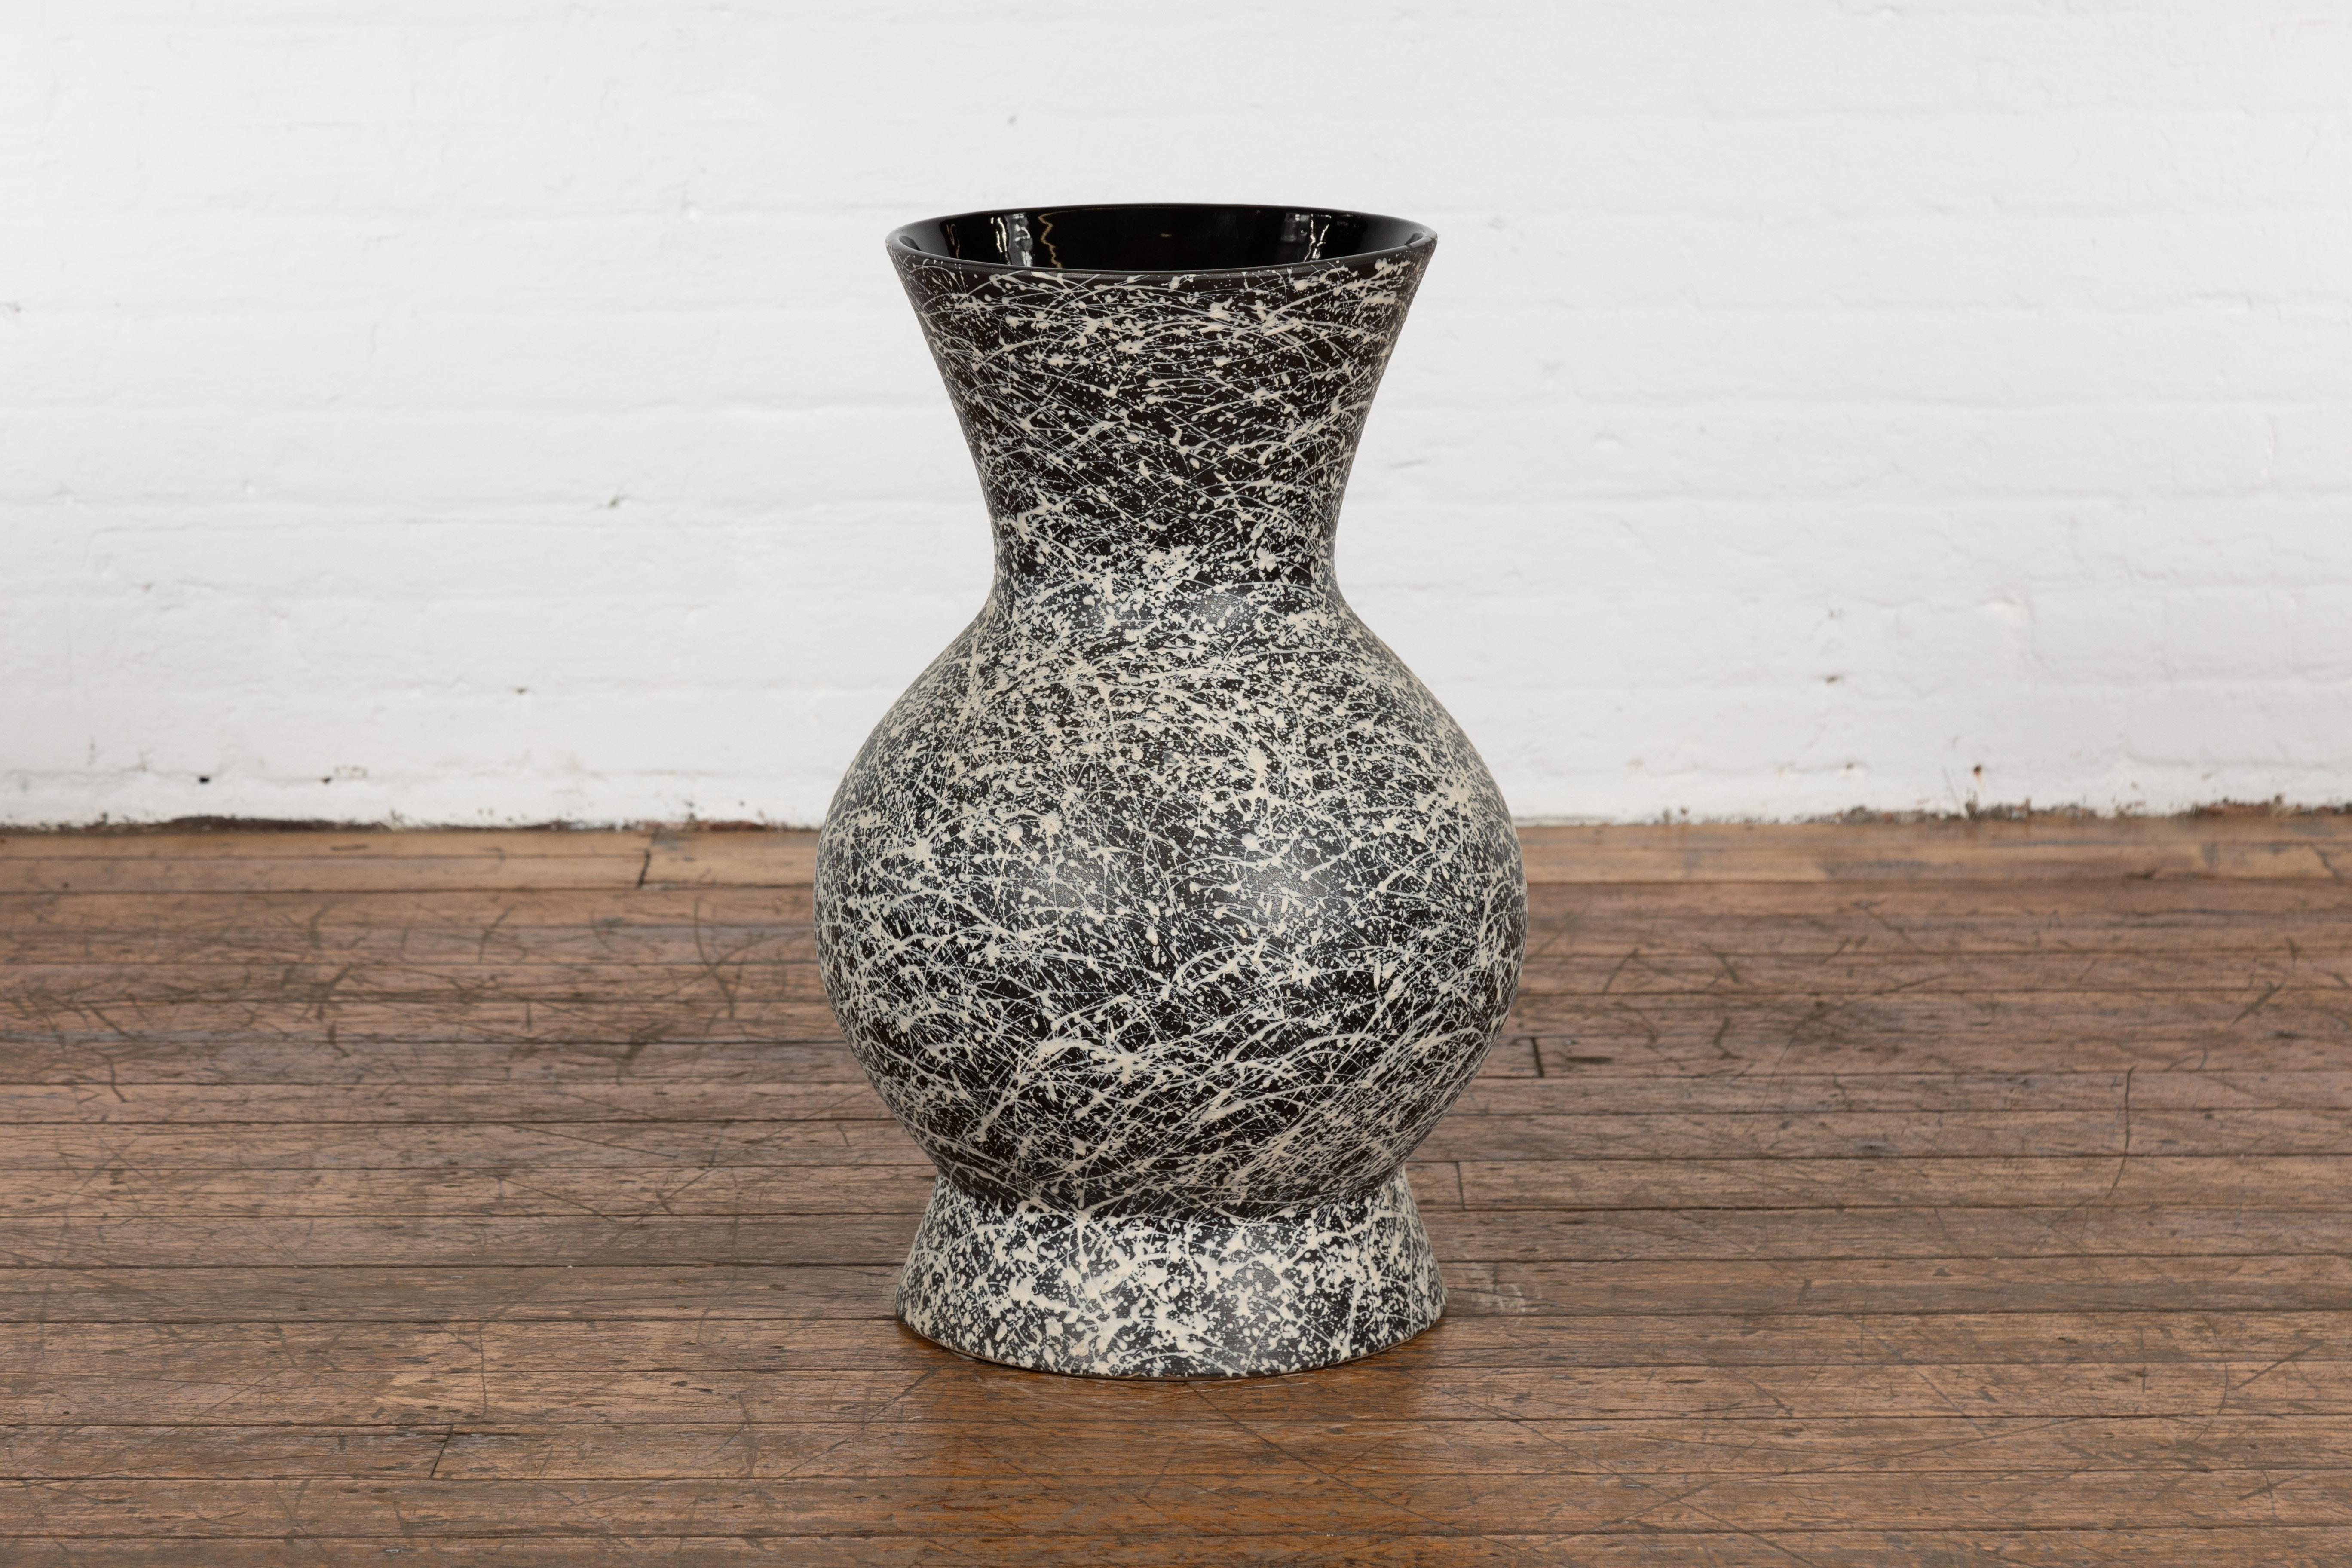 An artisan Prem Collection ceramic vase with nice rounded shape, black ground, white dripping décor and black glazed interior. Charming our eyes with its graceful lines, nice proportions and stylish décor, this vase is hand-crafted from ceramic. The